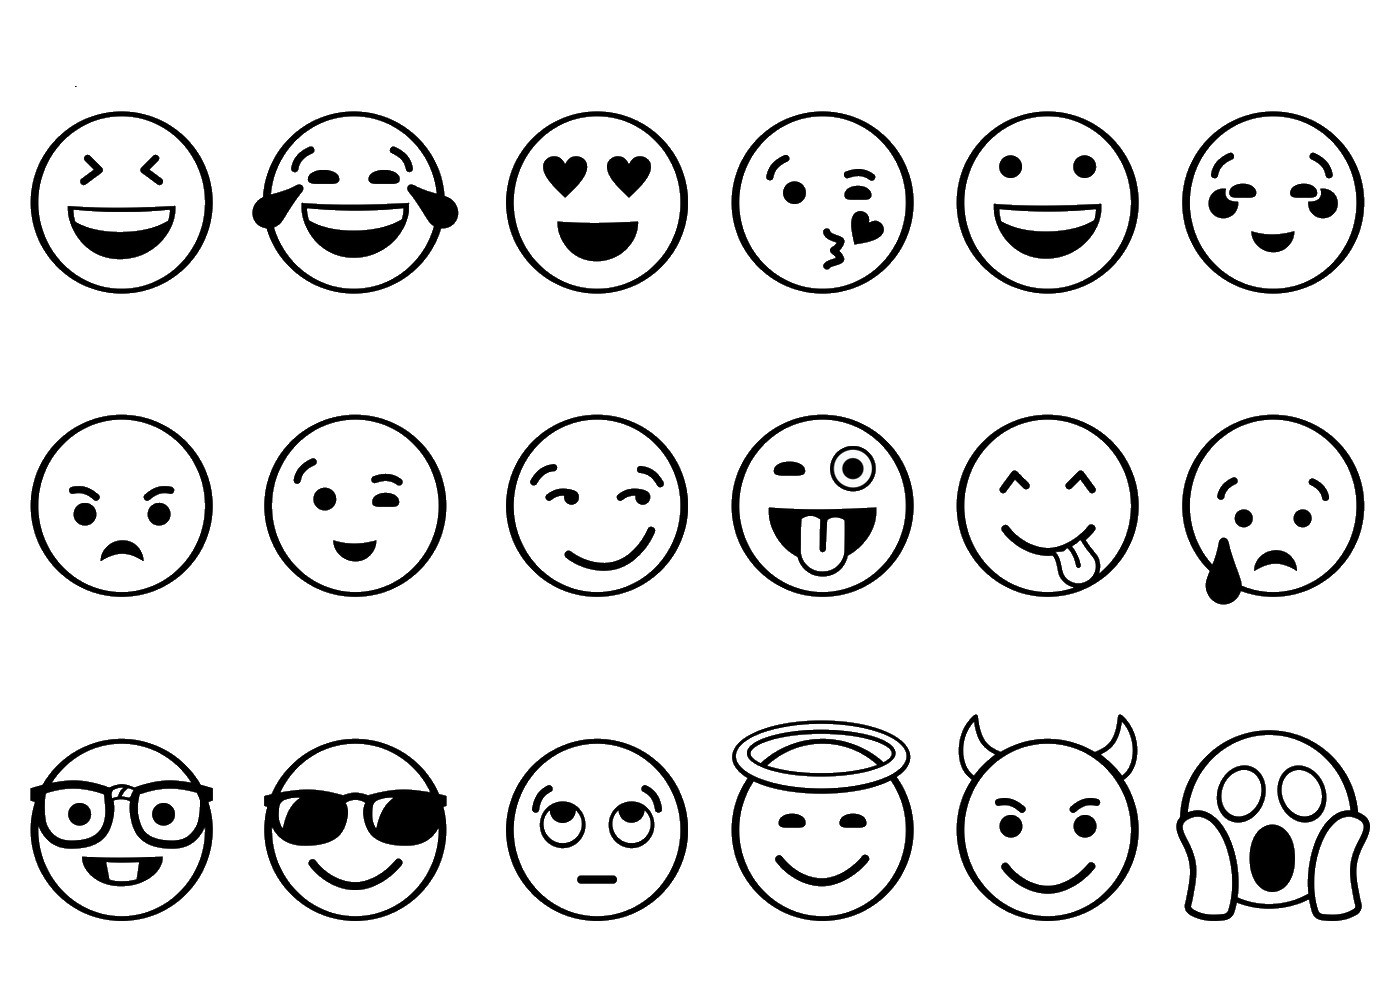 Best Free Printable Emoji Coloring Pages from Emoji Coloring Pages. 